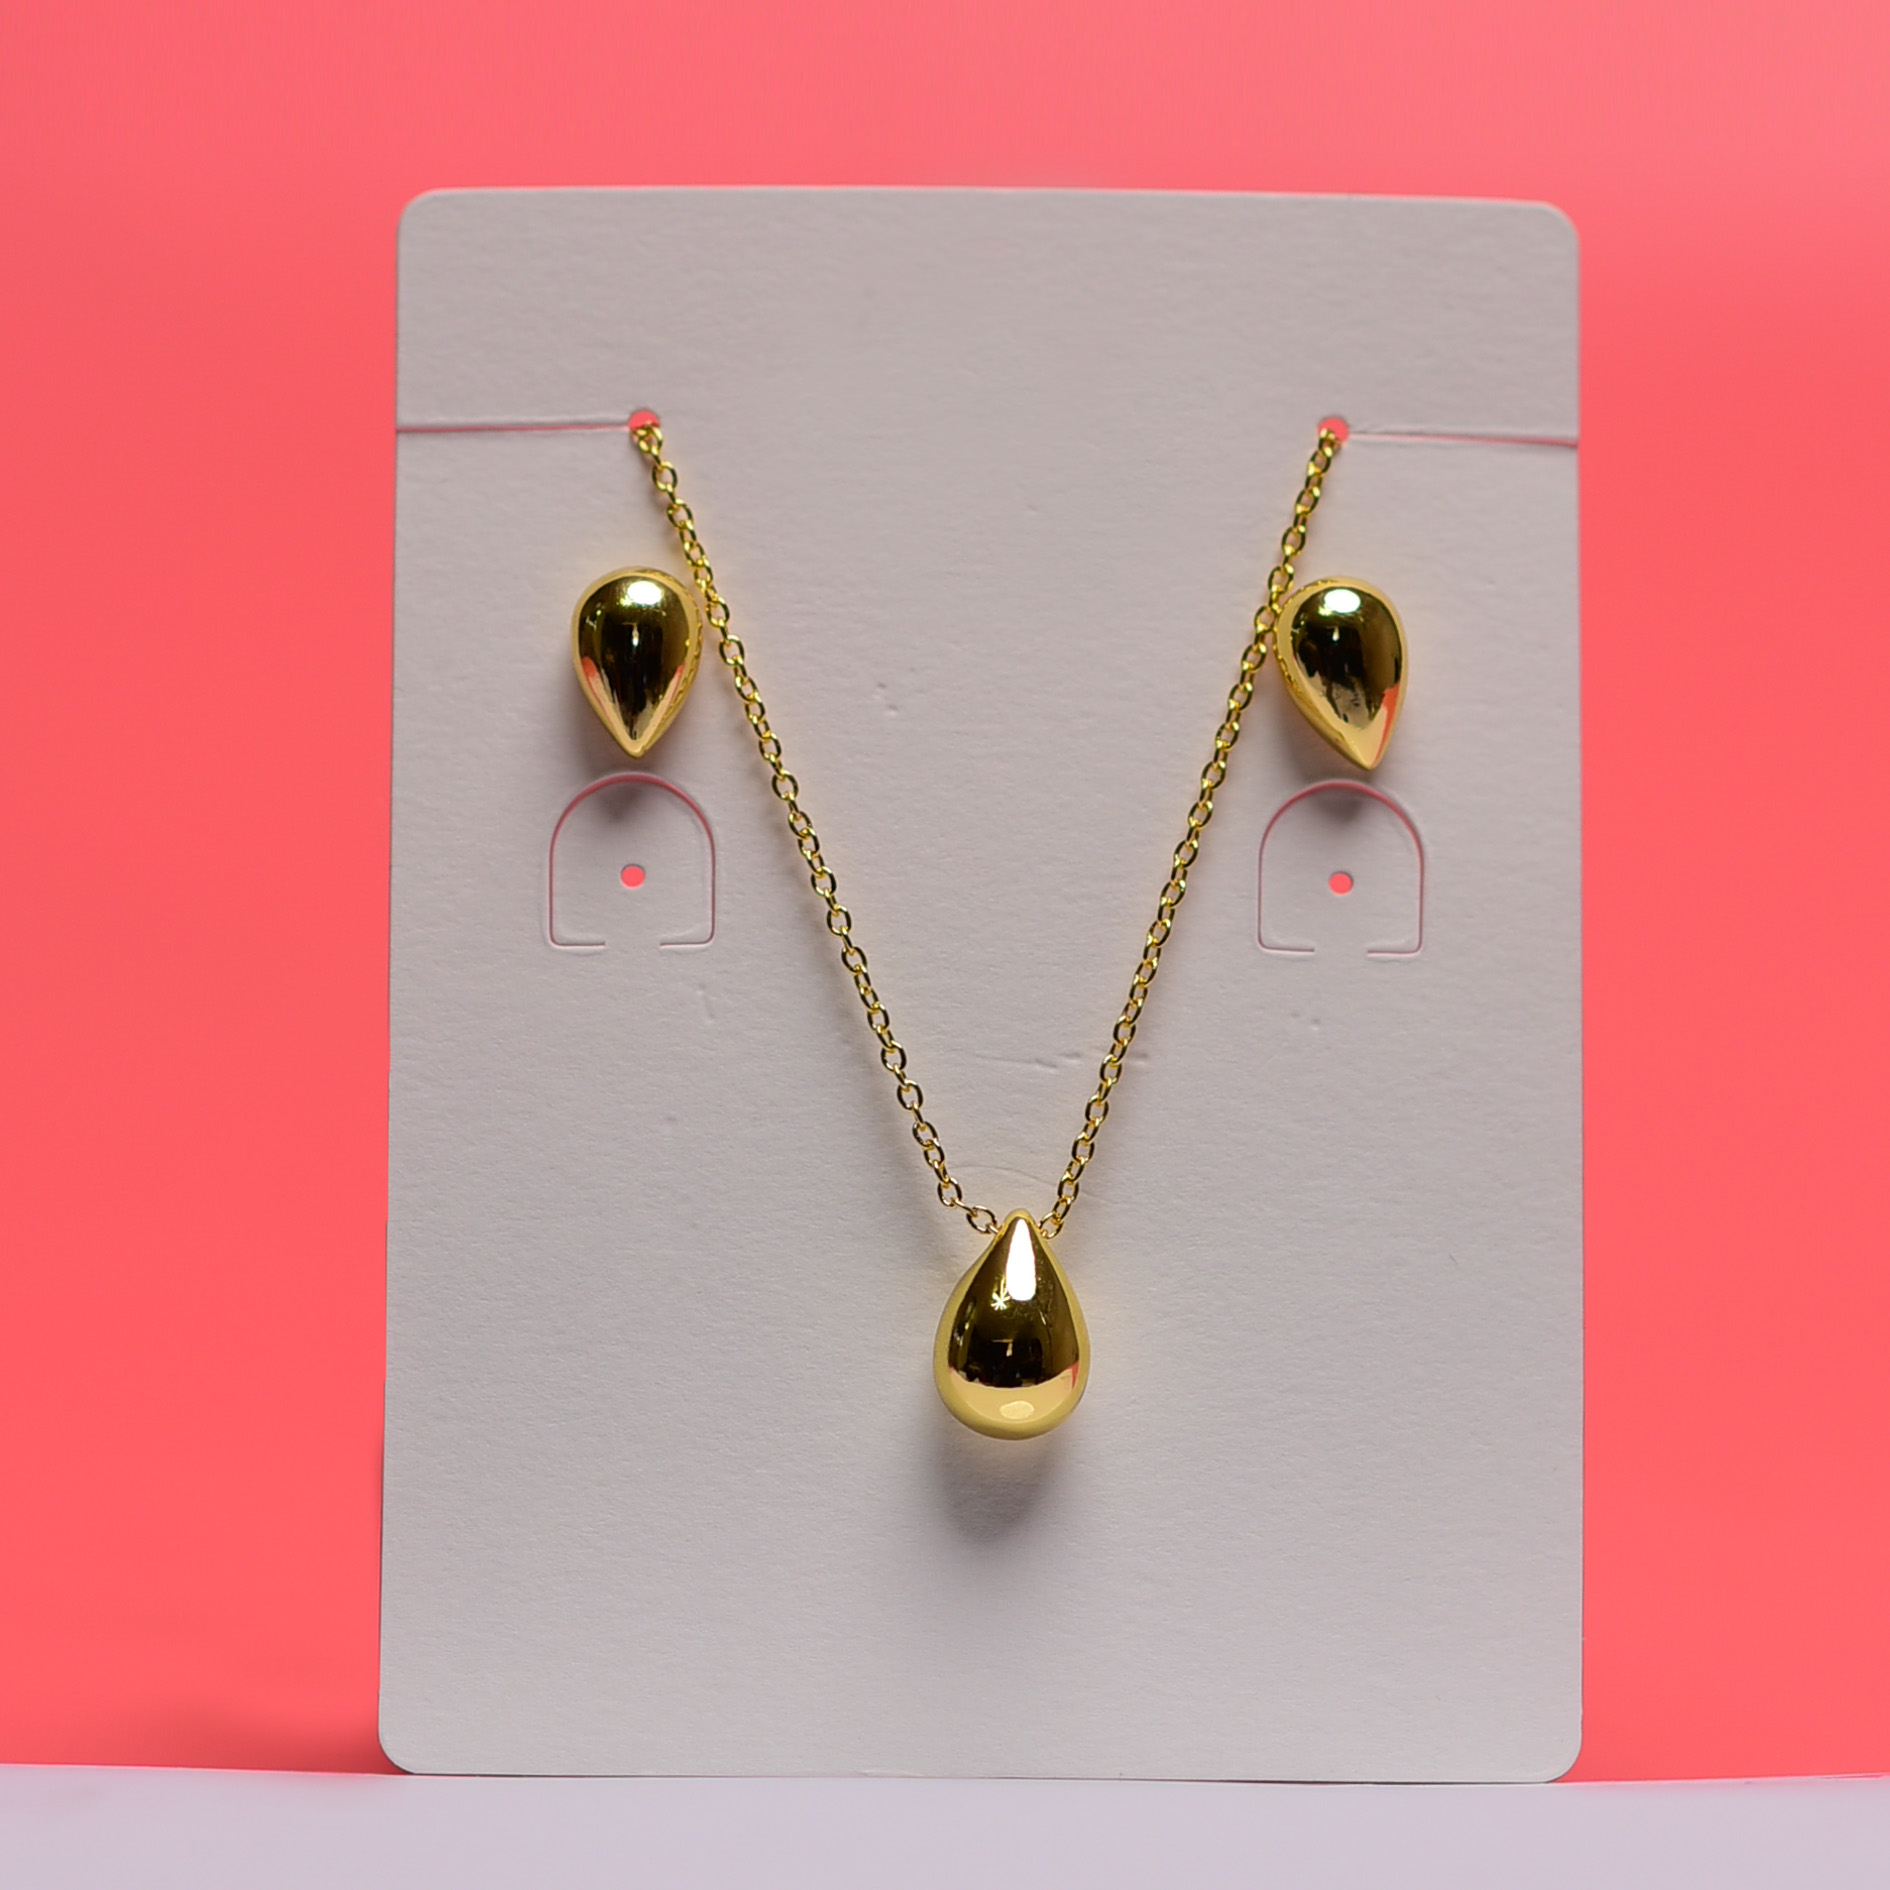 Gold, necklace / earrings sets